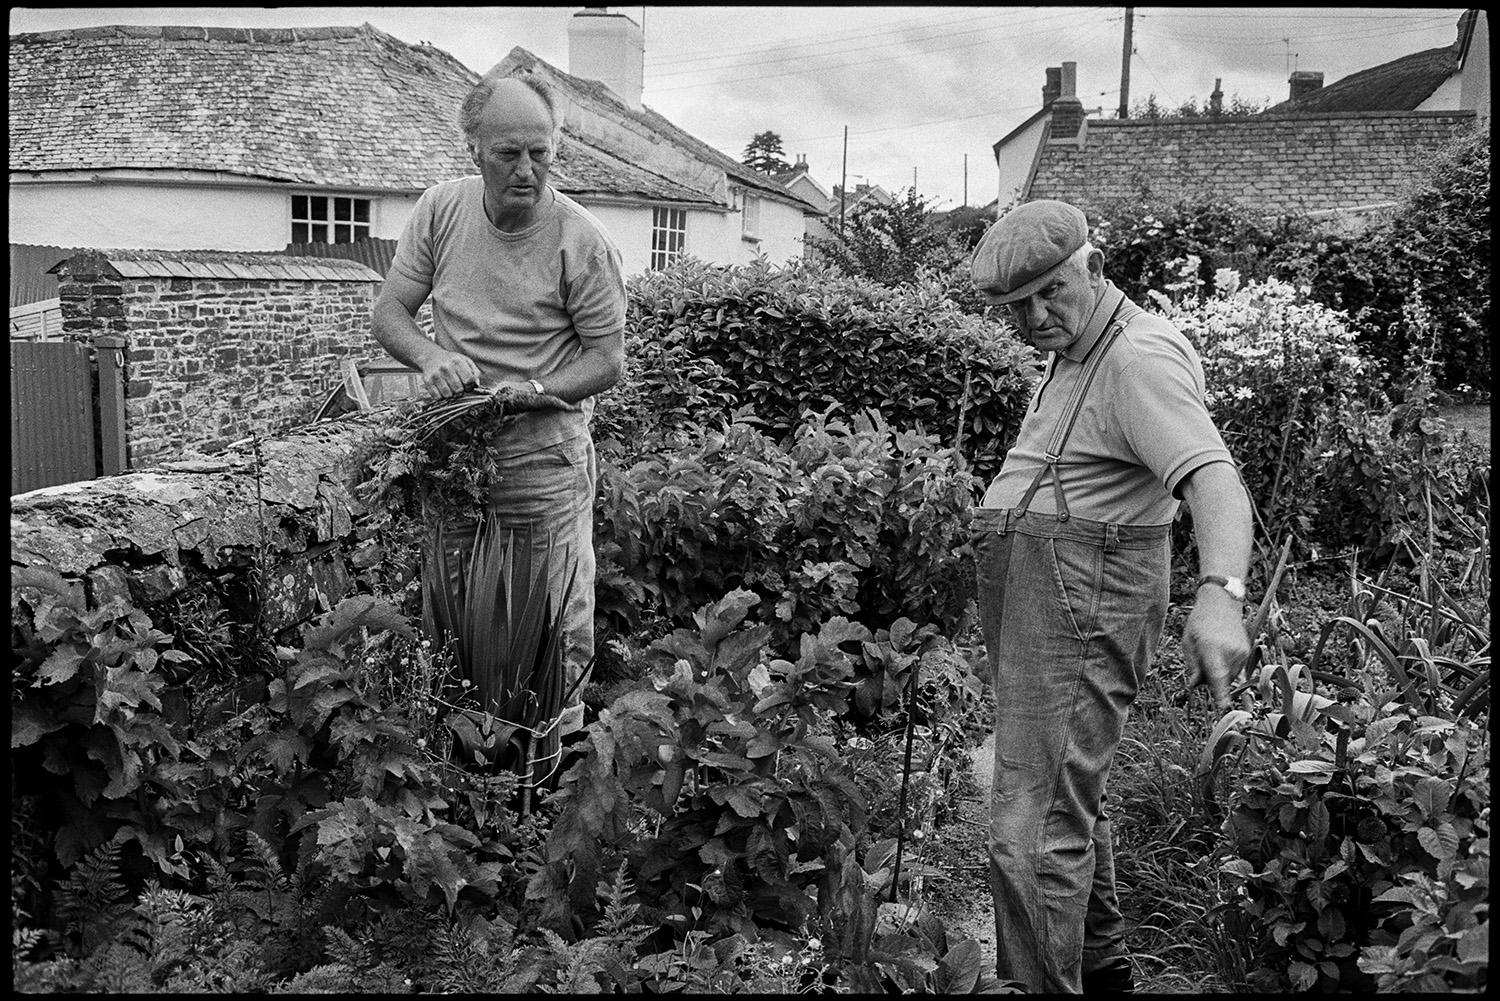 Father and son with vegetables for flower show, digging up parsnips, leeks, onions in shed. 
[Michael Mitchell and his father Lloyd Mitchell digging up a parsnip which they have grown at pear Tree Cottage, Aller Road, Dolton. Lloyd Mitchell is pointing at other plants in the garden. They are selecting produce to take to Dolton Flower Show.]